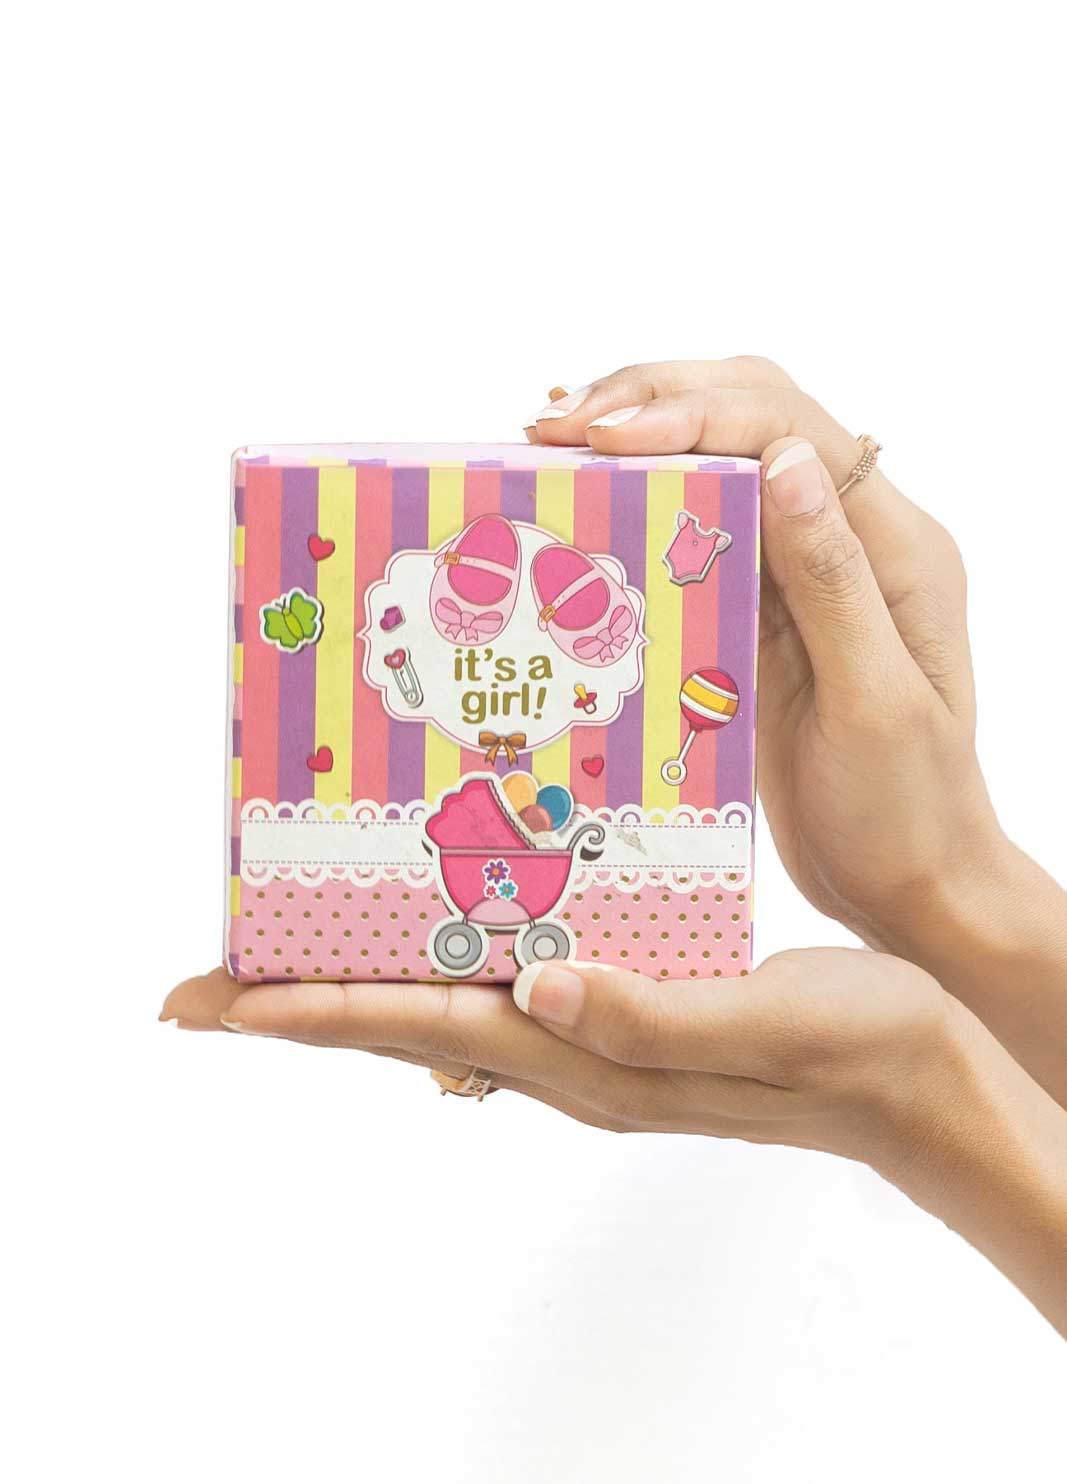 it's a girl sweet box pink box with it's a girl print 1 pao sweet box 250 gm it's a girl sweet box baby announcement box